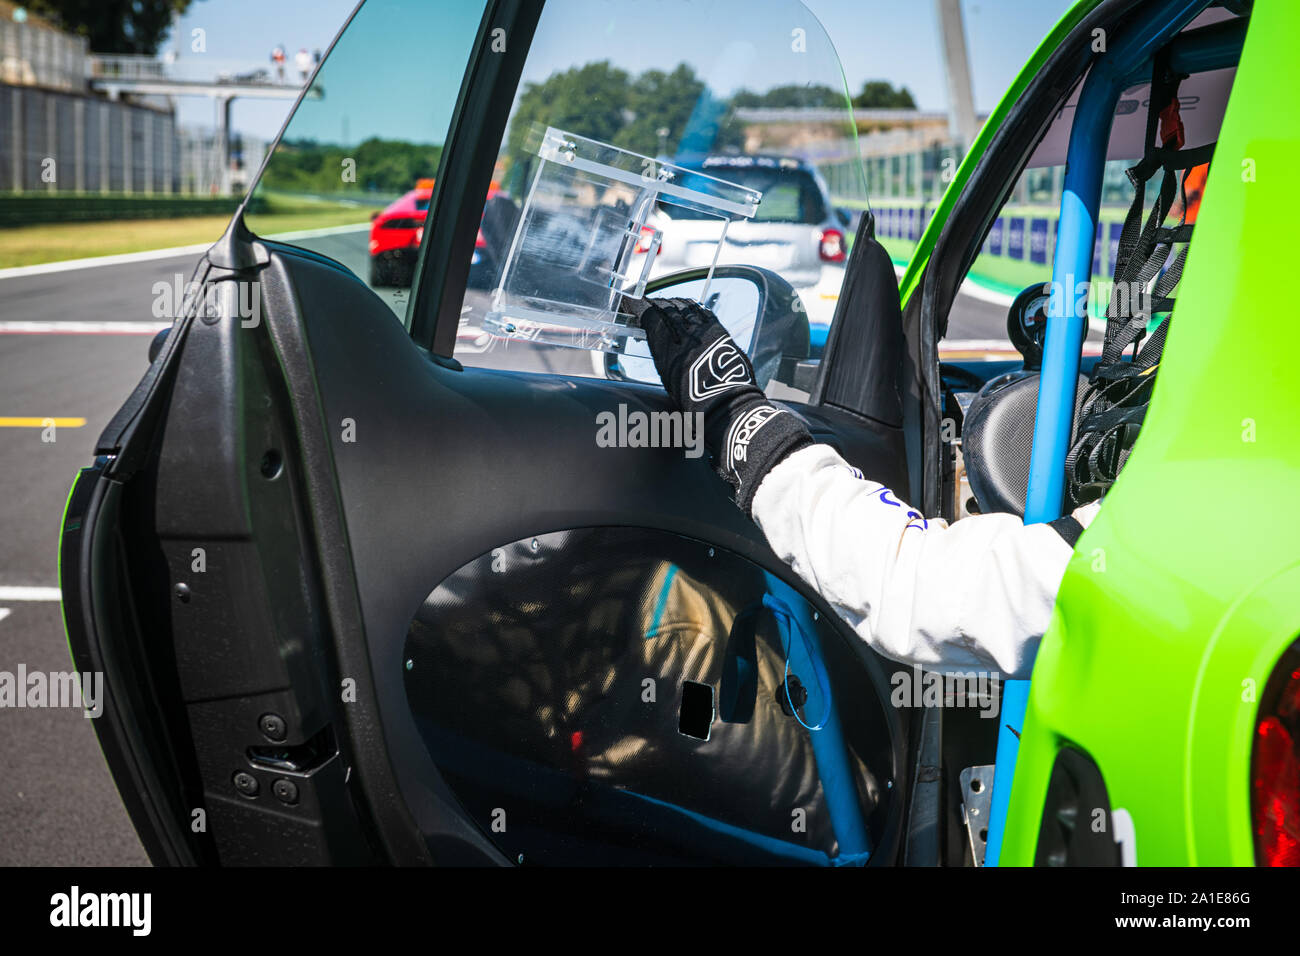 Vallelunga, Italy september 14 2019. Rear view of driver of Smart electric engine racing car ready for start in circuit Stock Photo